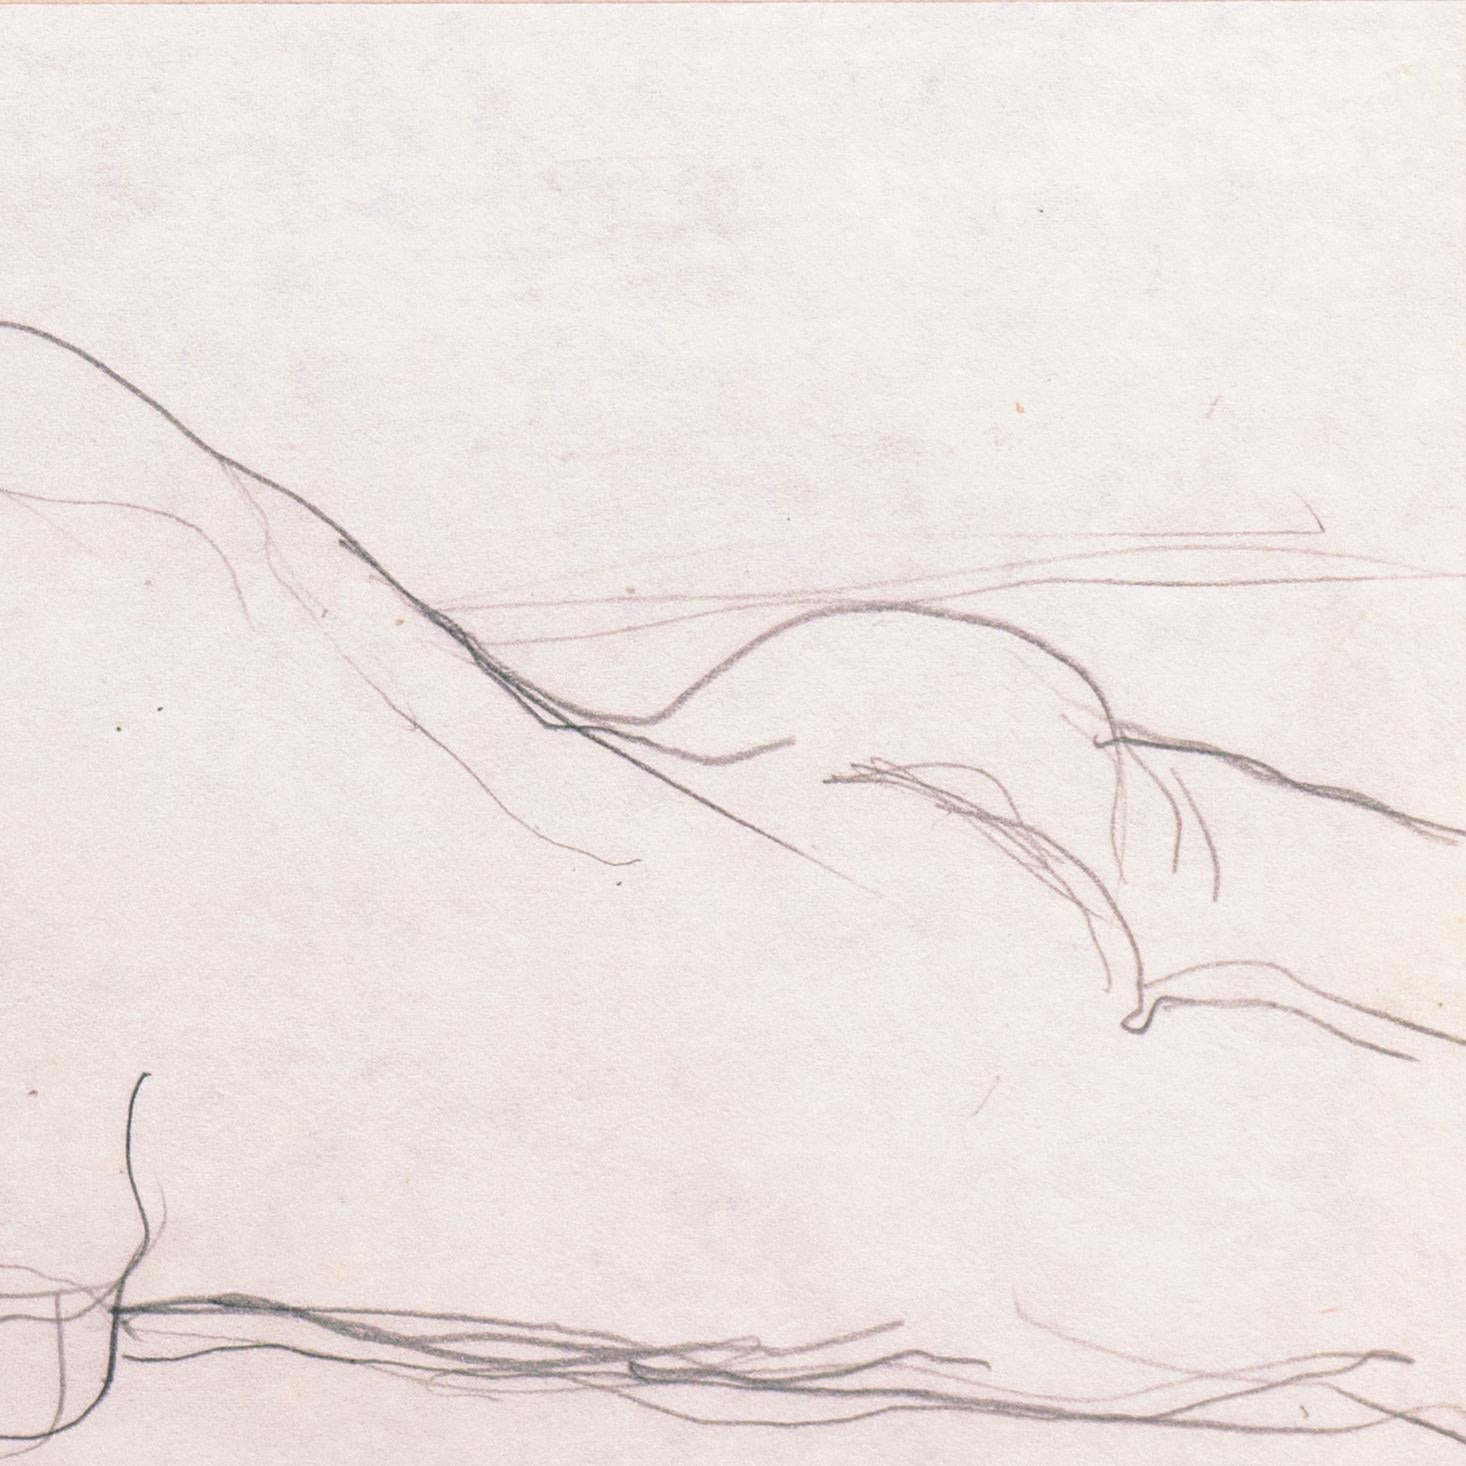 Stamped, verso, with estate stamp for Victor Di Gesu (American, 1914-1988) and created circa 1955.

An elegant, cabinet-sized Post-Impressionist graphite drawing of a young woman, shown reclining on a blanket and resting on her elbows.

Winner of